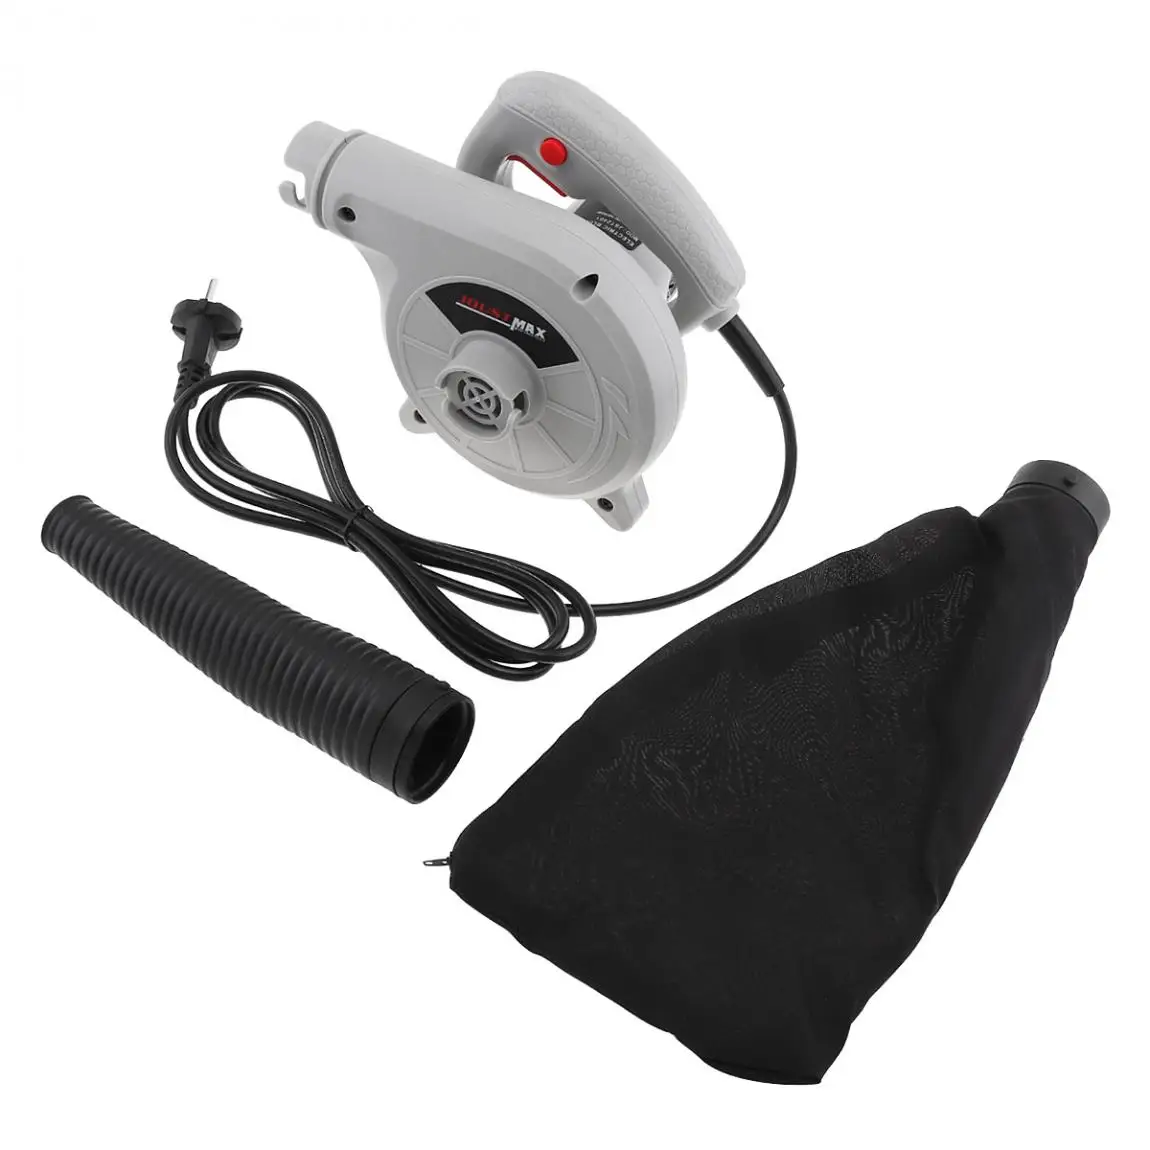 

600W Blower Multifunctional Portable Electric Hand Operated Blower with Suction Head and Collecting Bag for Removing Dust